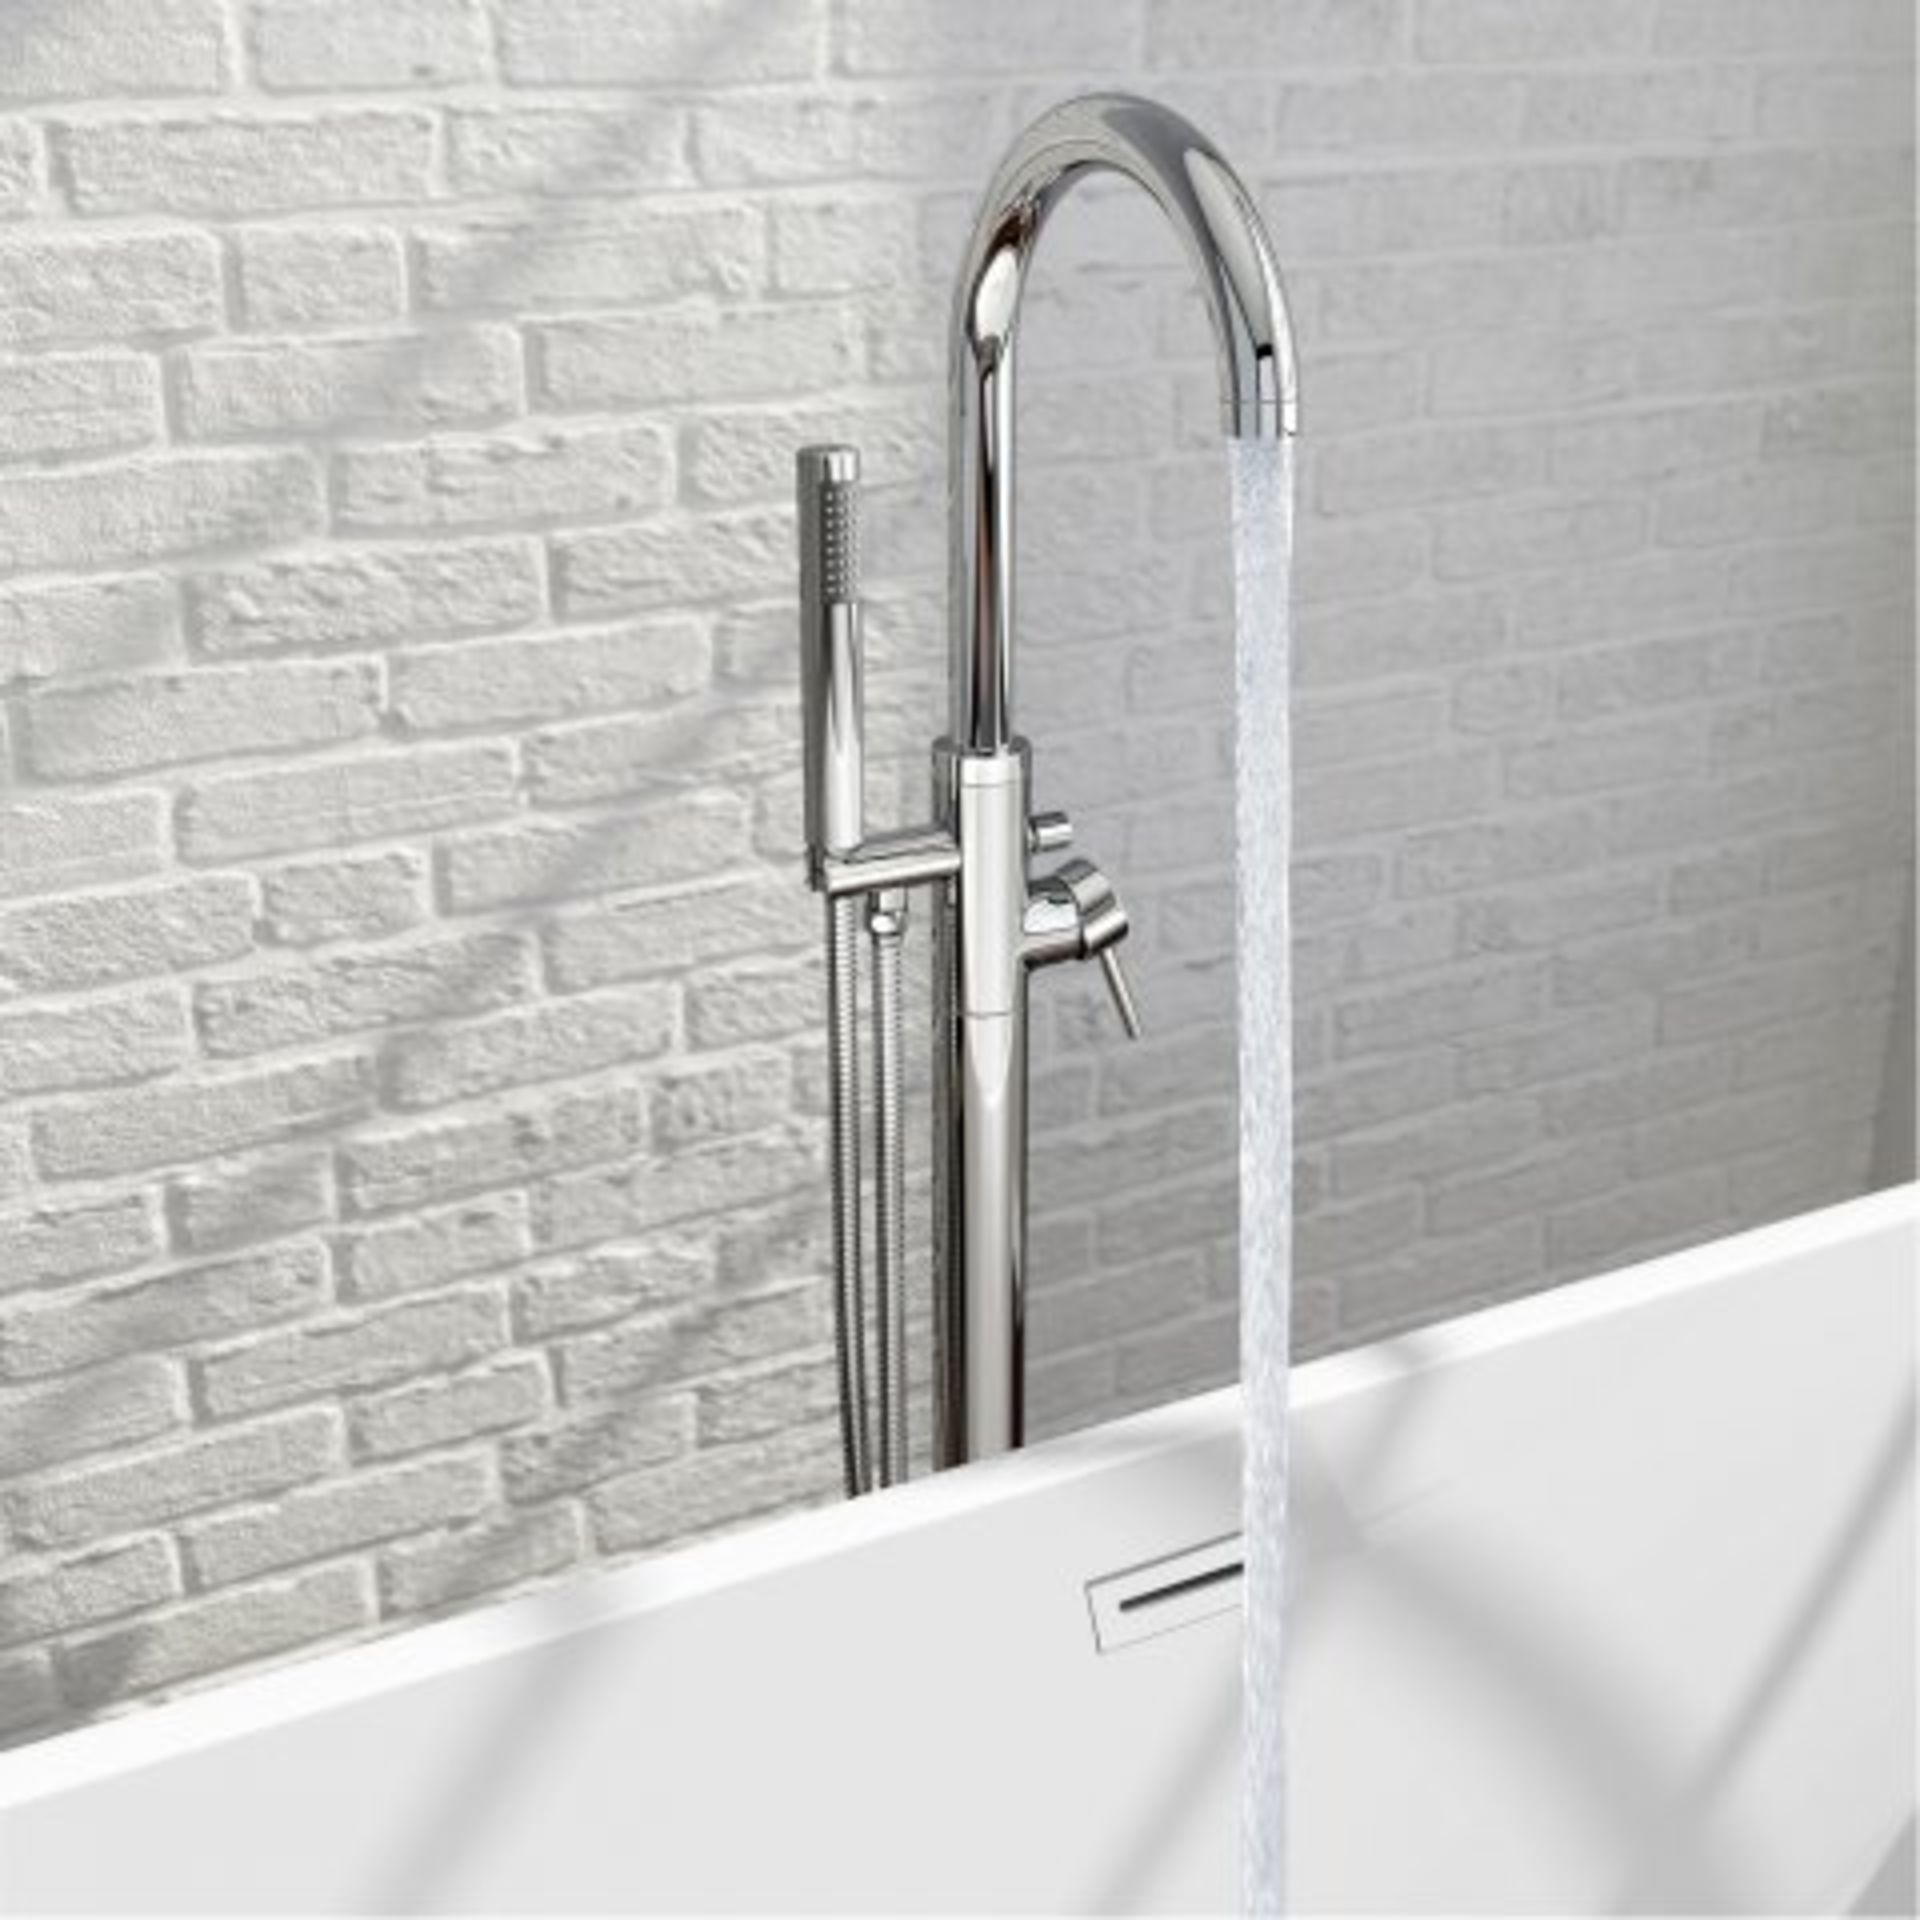 (20) Gladstone II Freestanding Bath Mixer Tap with Hand Held Shower Head Simplicity at its best: Our - Image 4 of 5